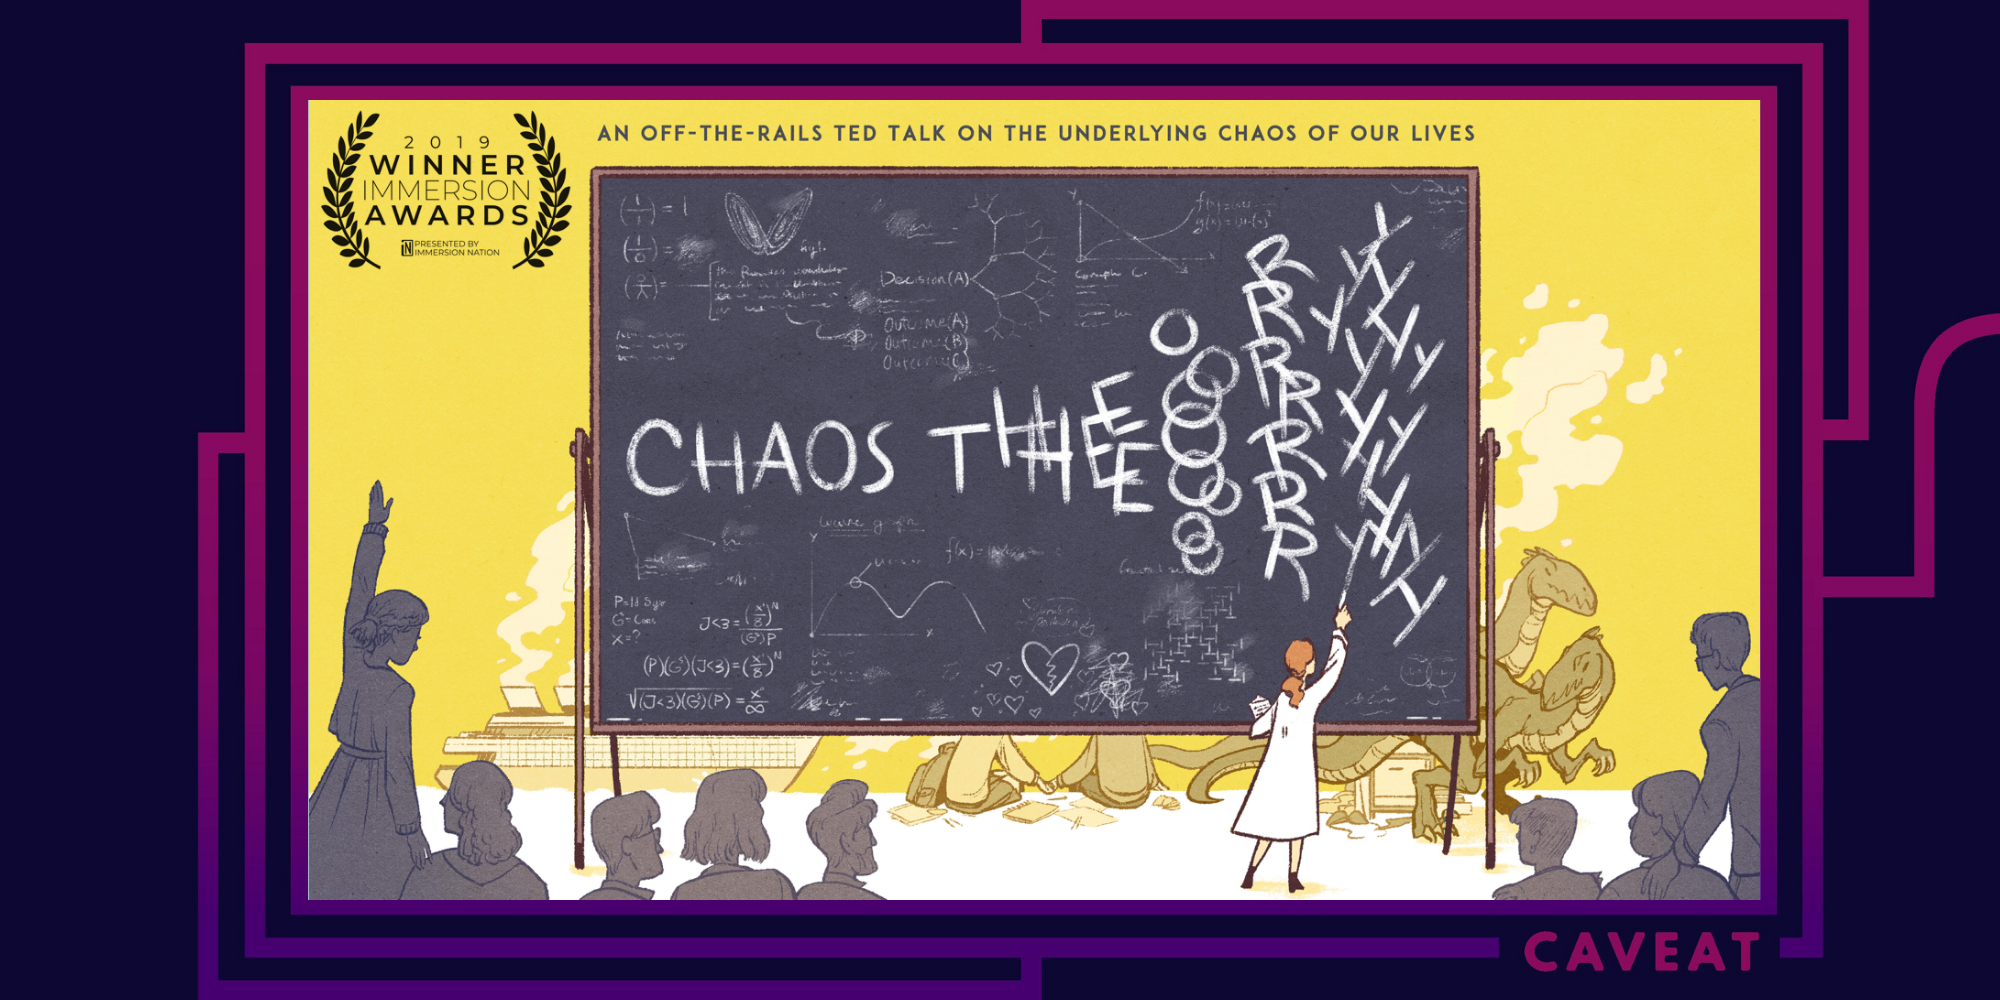 POSTPONED: Chaos Theory: an off-the-rails TED Talk on the underlying chaos of our lives